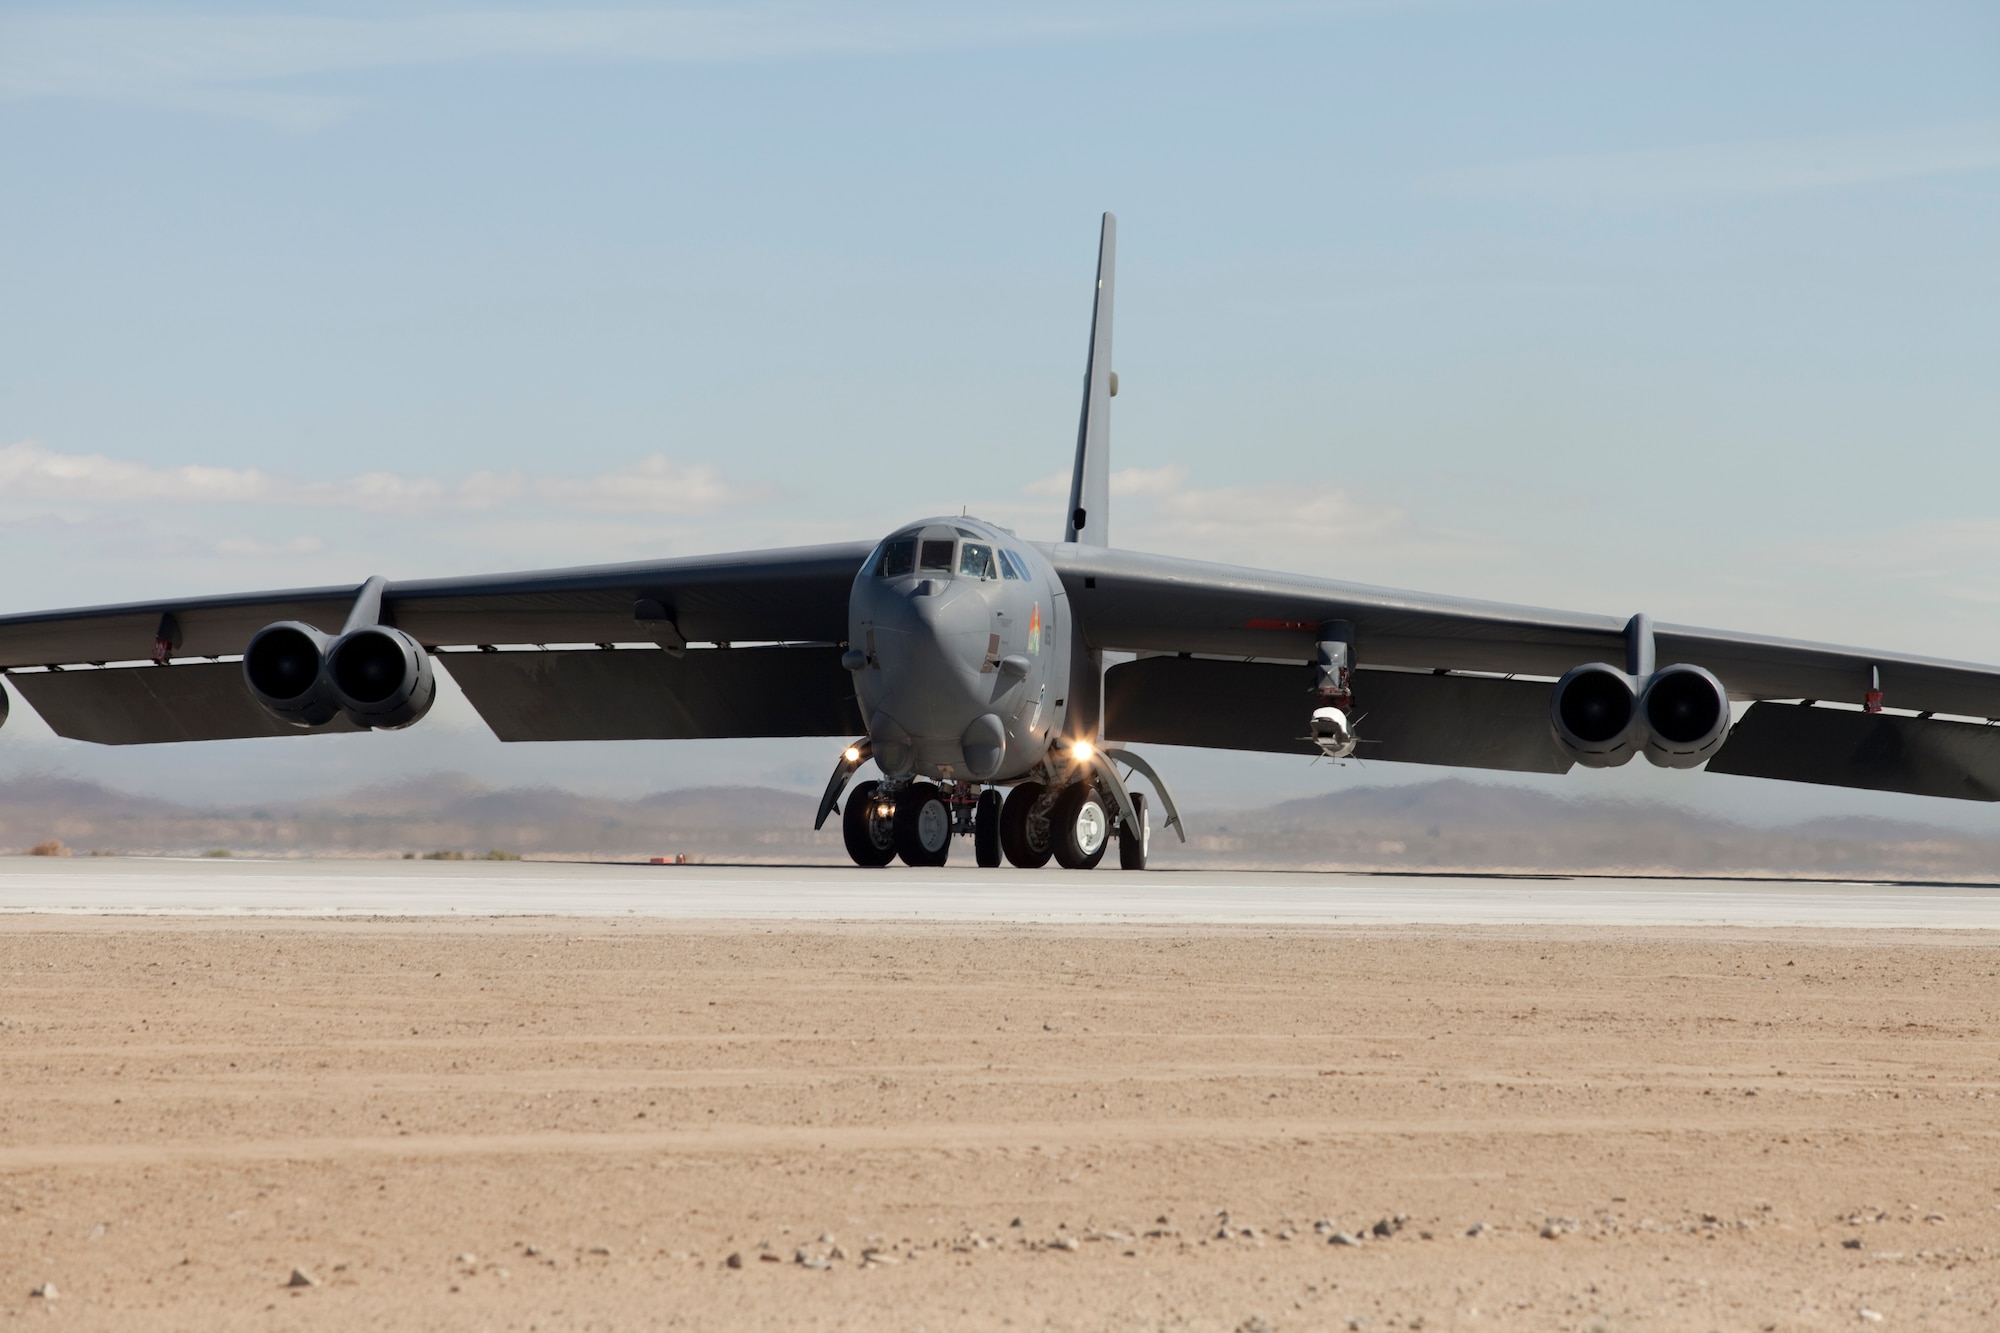 A B-52H carrying an X-51A WaveRider awaits takeoff at Edwards, May 26.  The X-51A is an unmanned scramjet engine demonstrator.  (Air Force photo by Greg Davis)